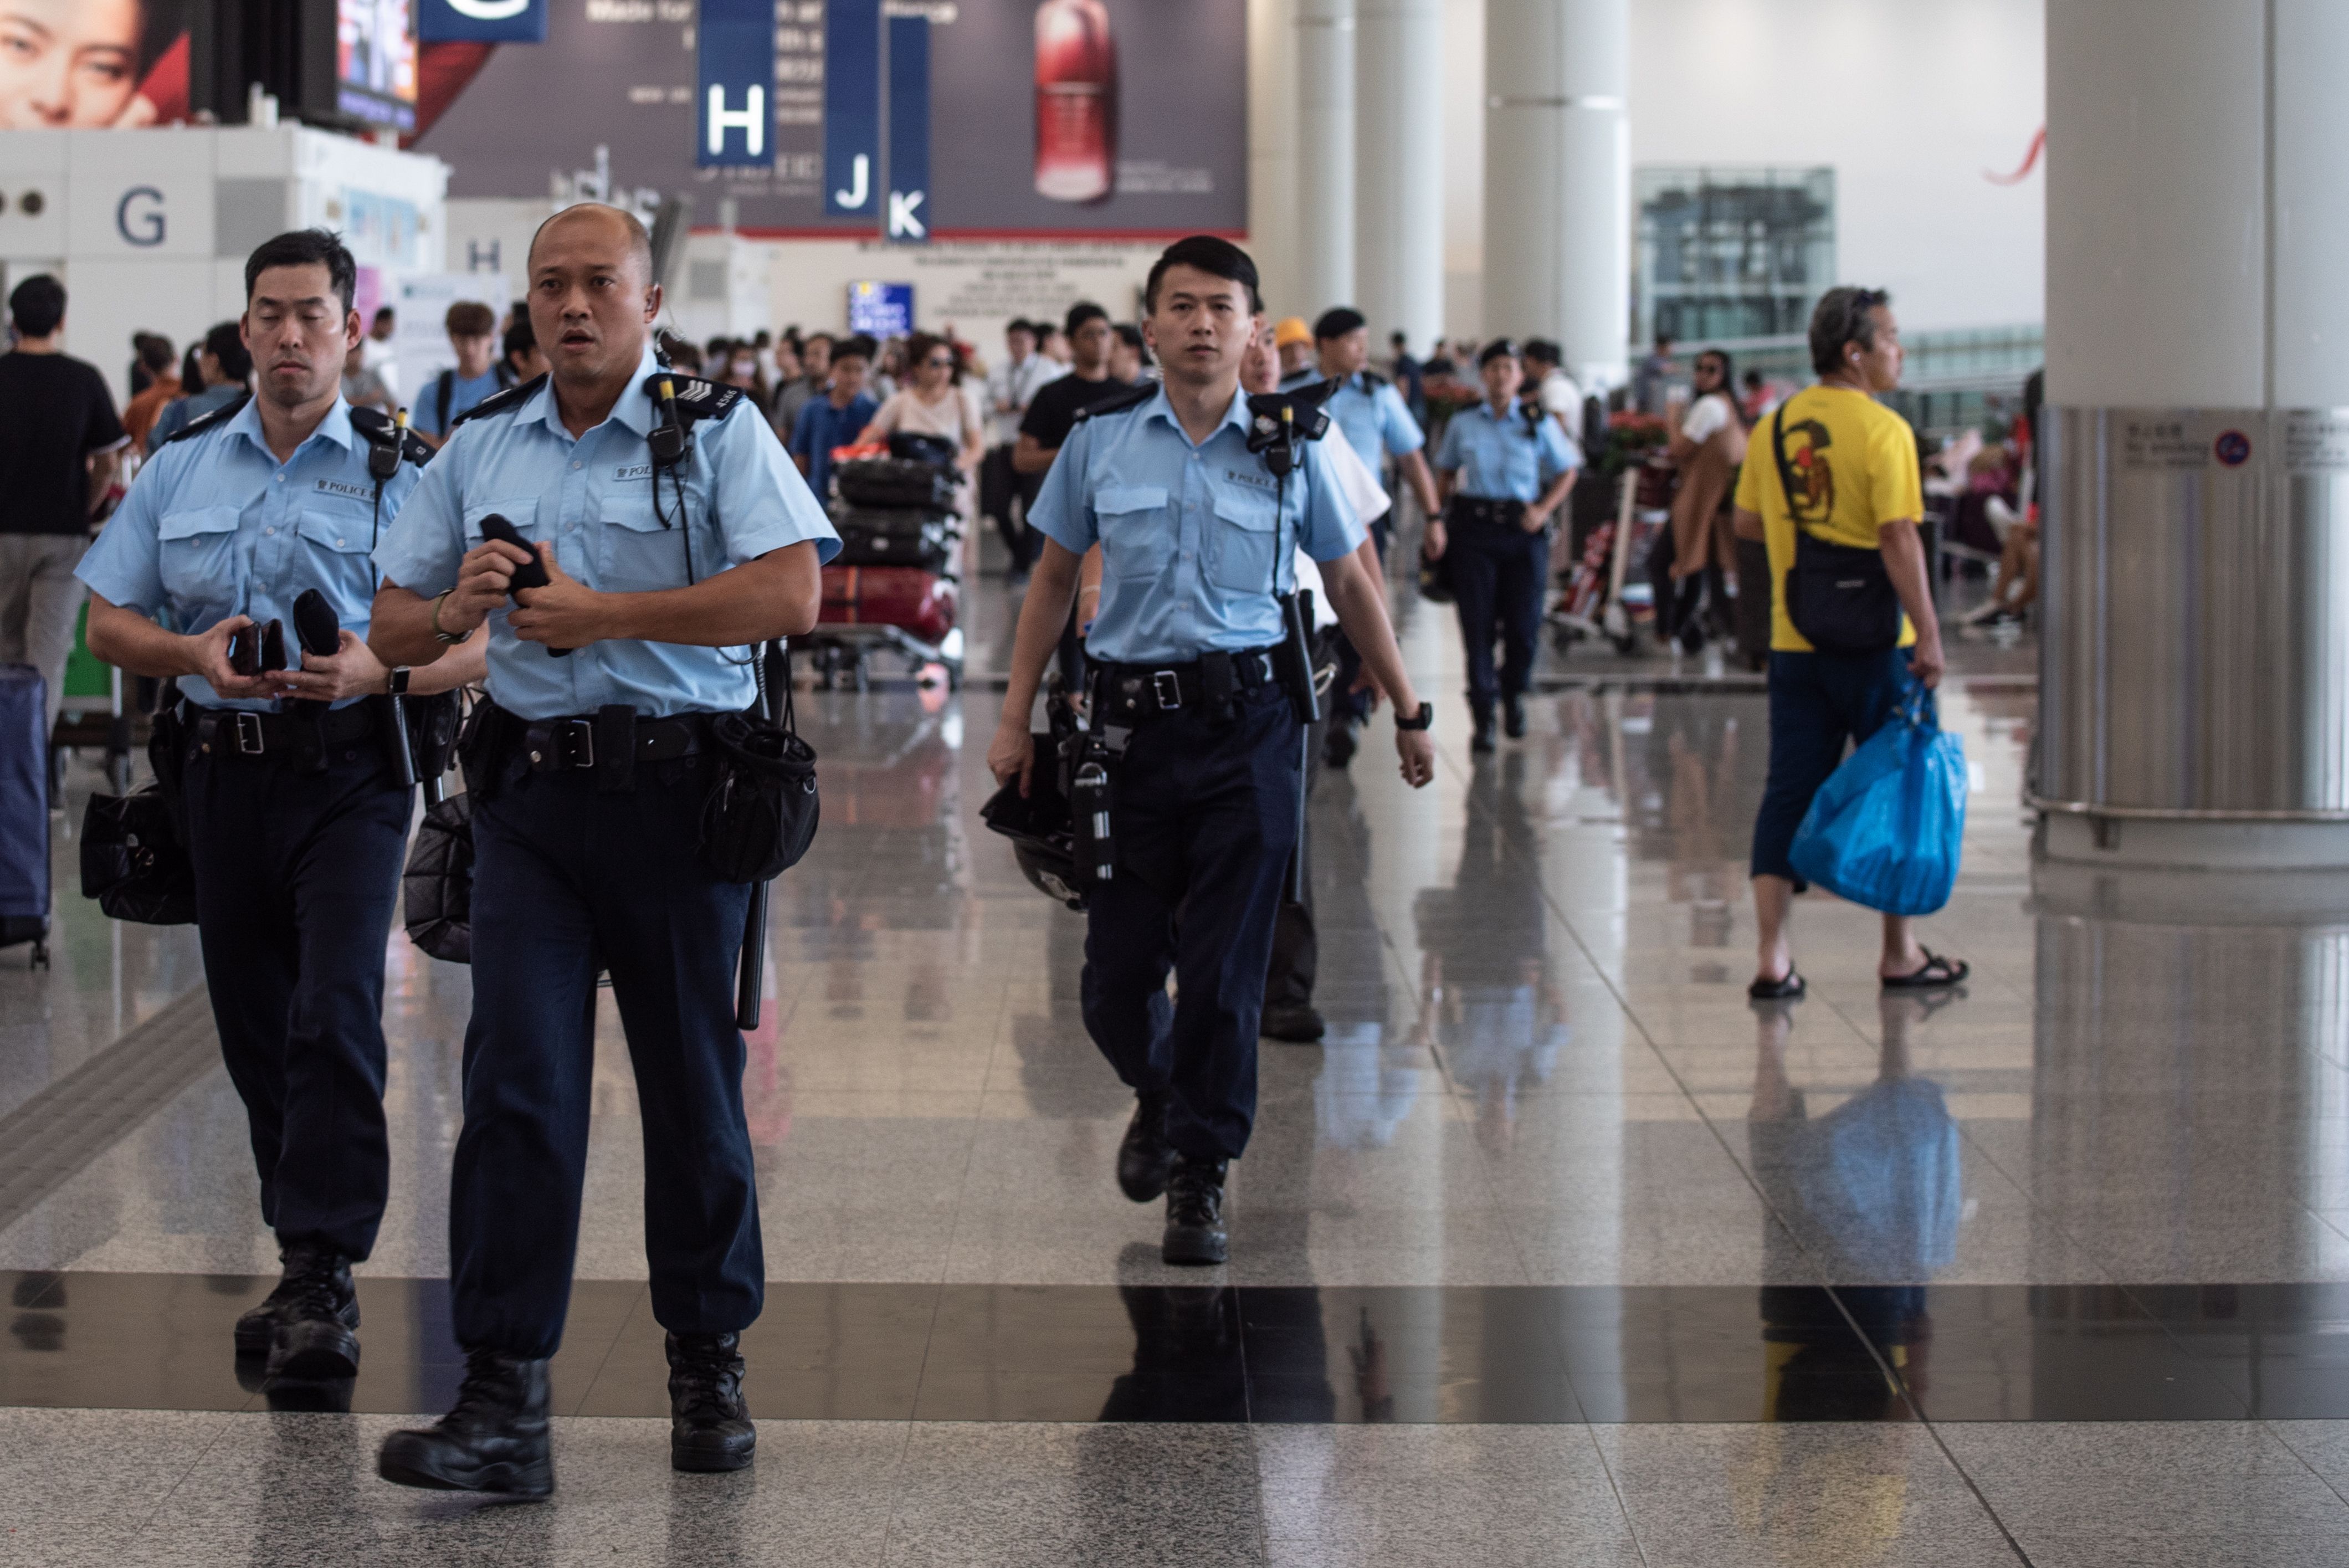 Police officers patrol in the departures hall of Hong Kong's International Airport on August 14, 2019.